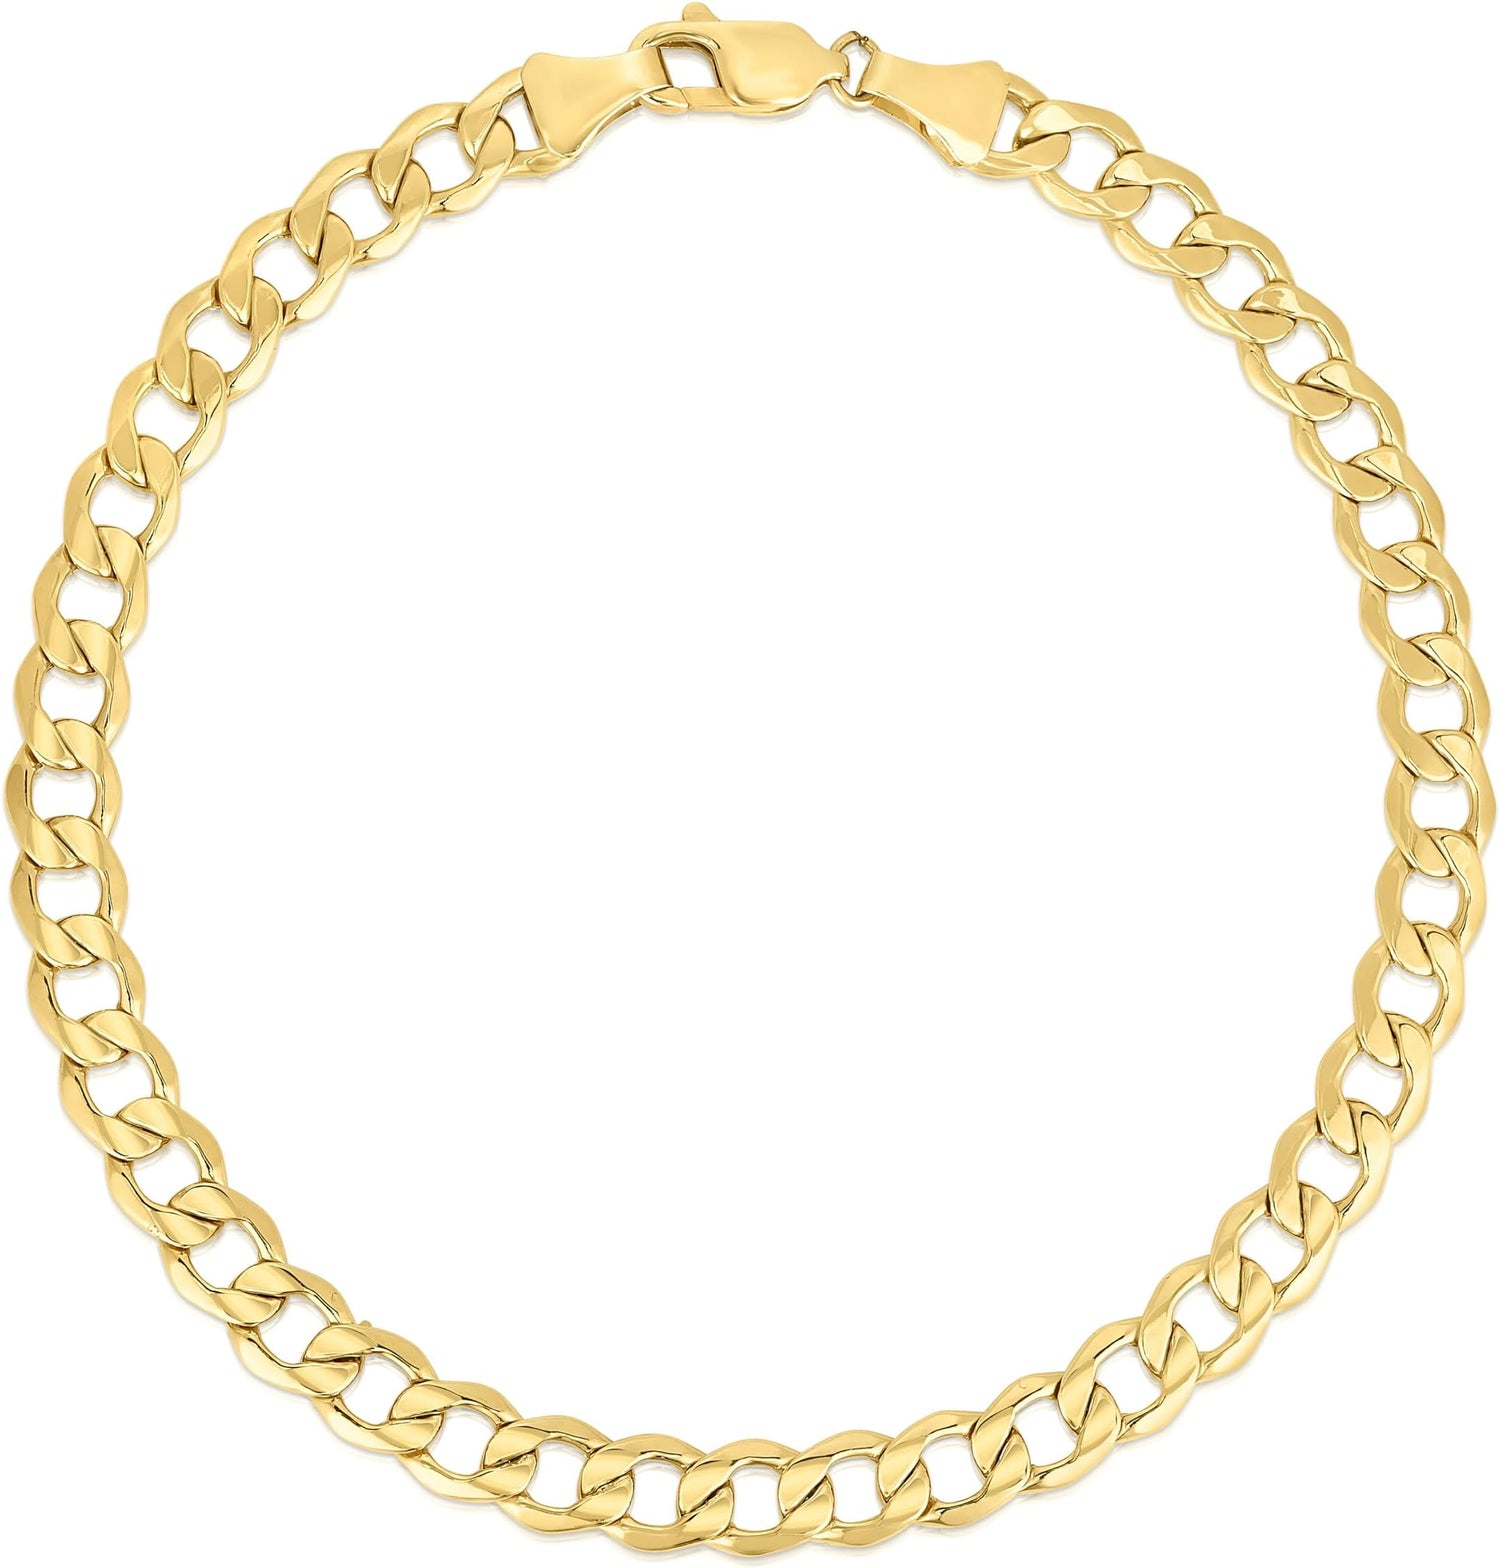 10k Yellow Gold 6.5mm Hollow Cuban Curb Link Bracelet or Anklet